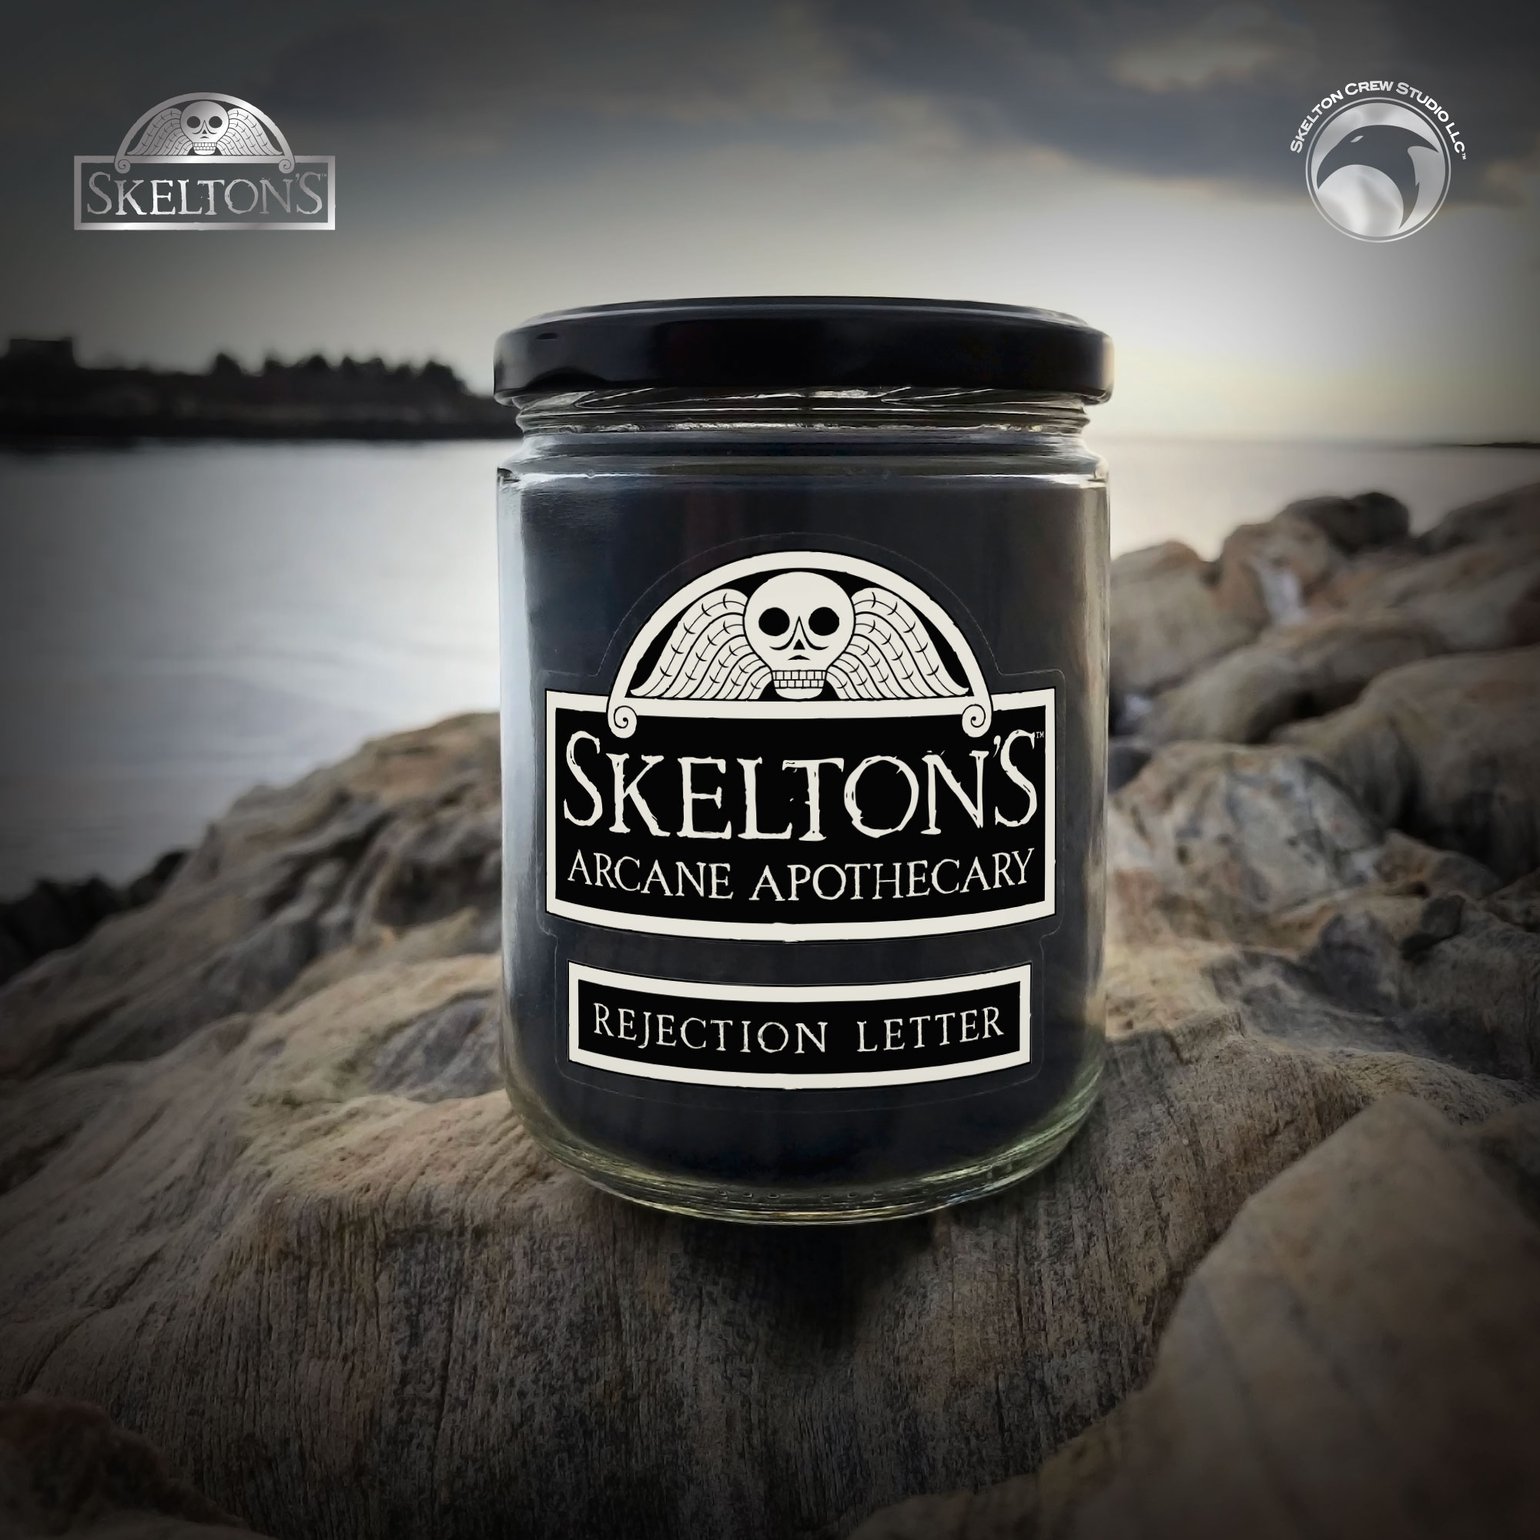 Image of Skelton's Arcane Apothecary: Rejection Letter candle! FREE U.S. SHIPPING!